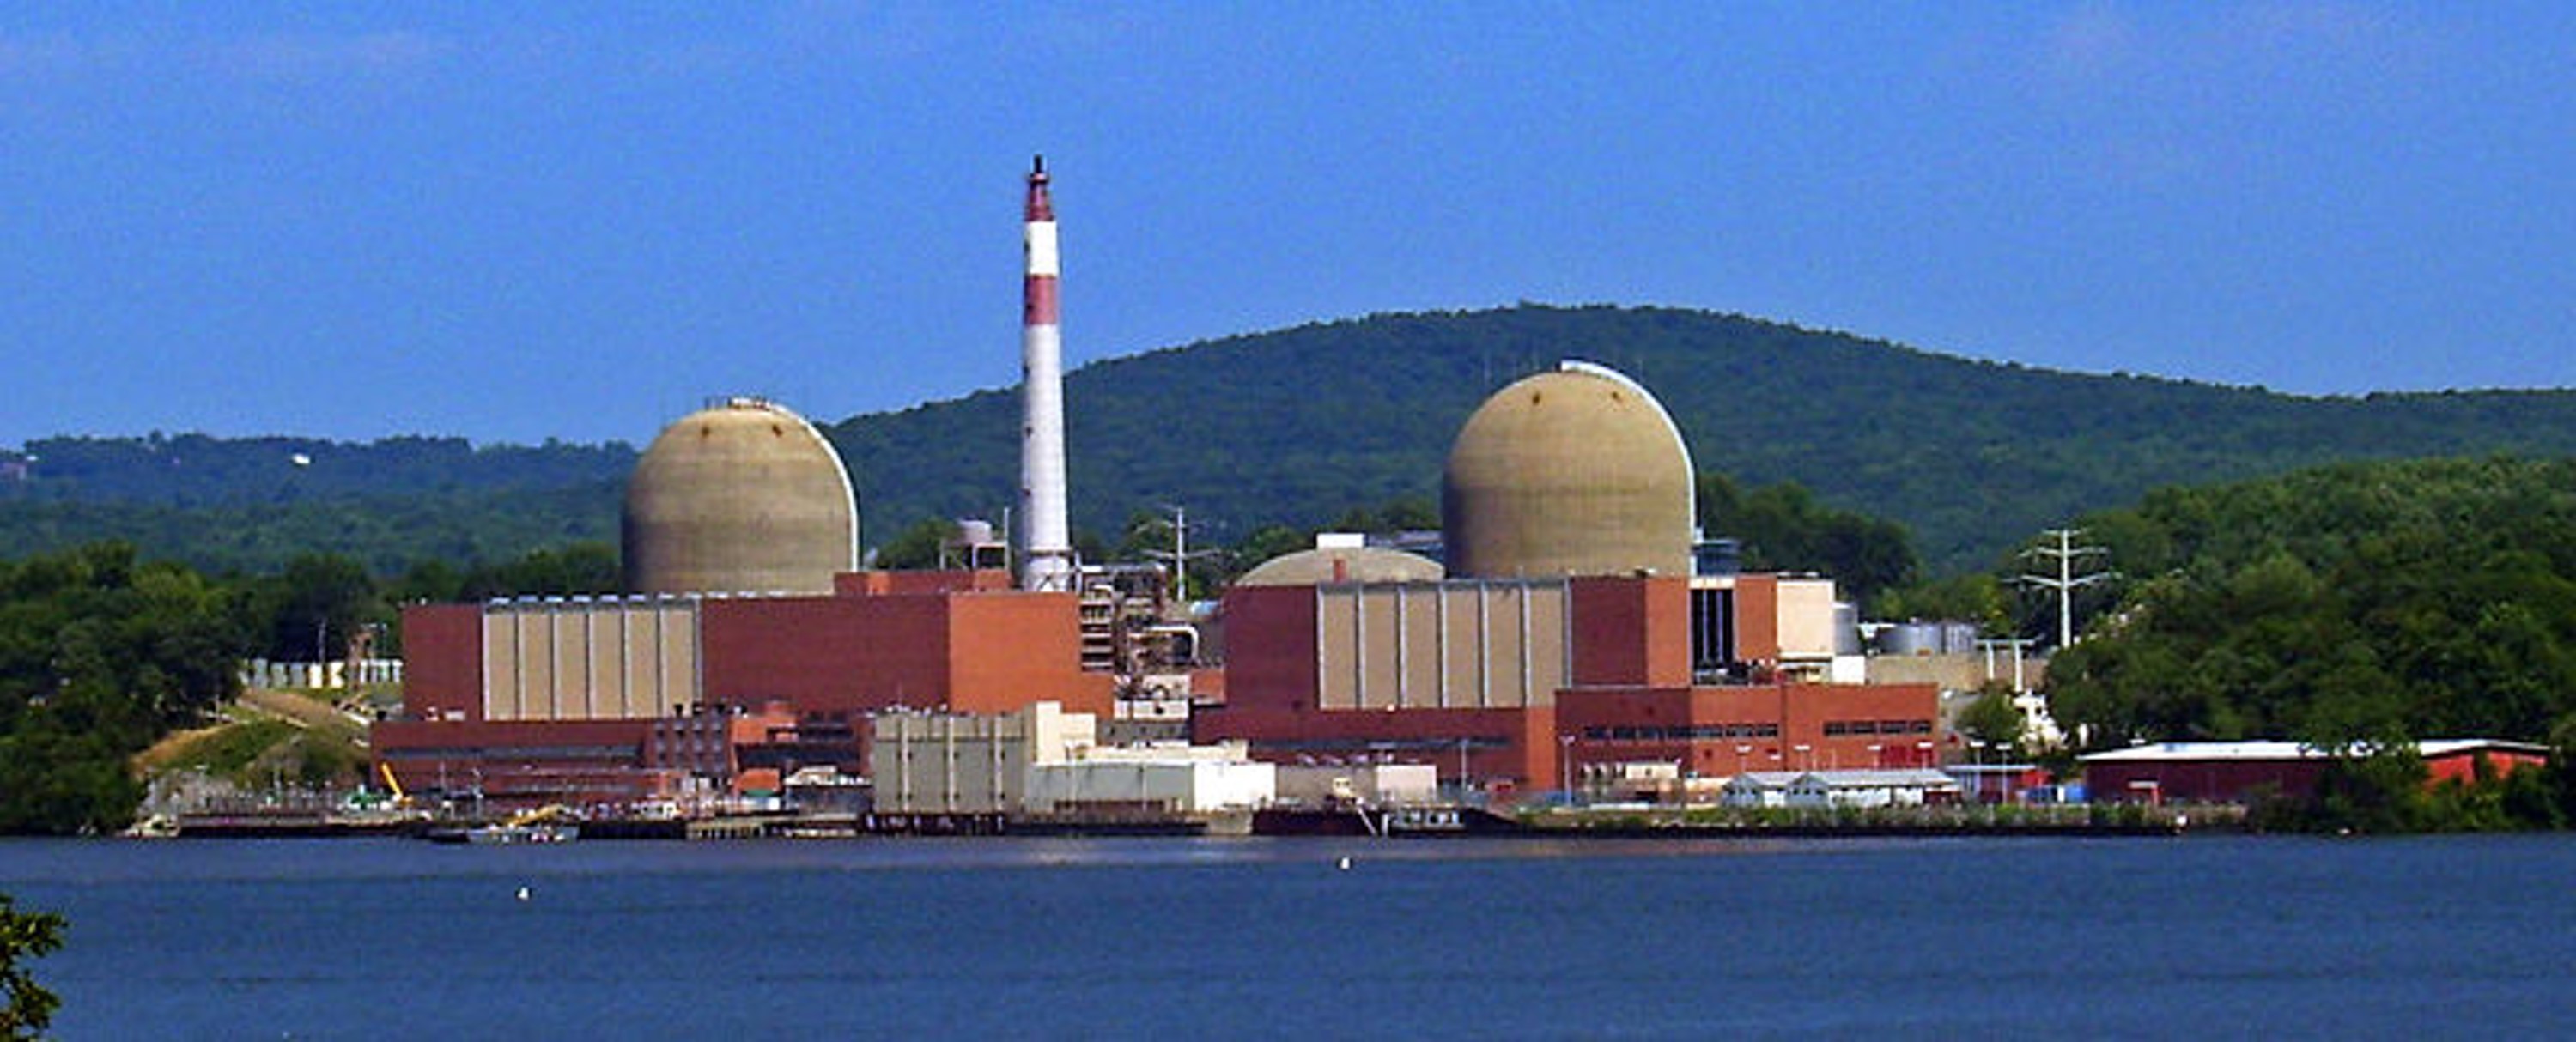 Should Nuclear Power Play a Role in Reducing Fossil Fuel Use?